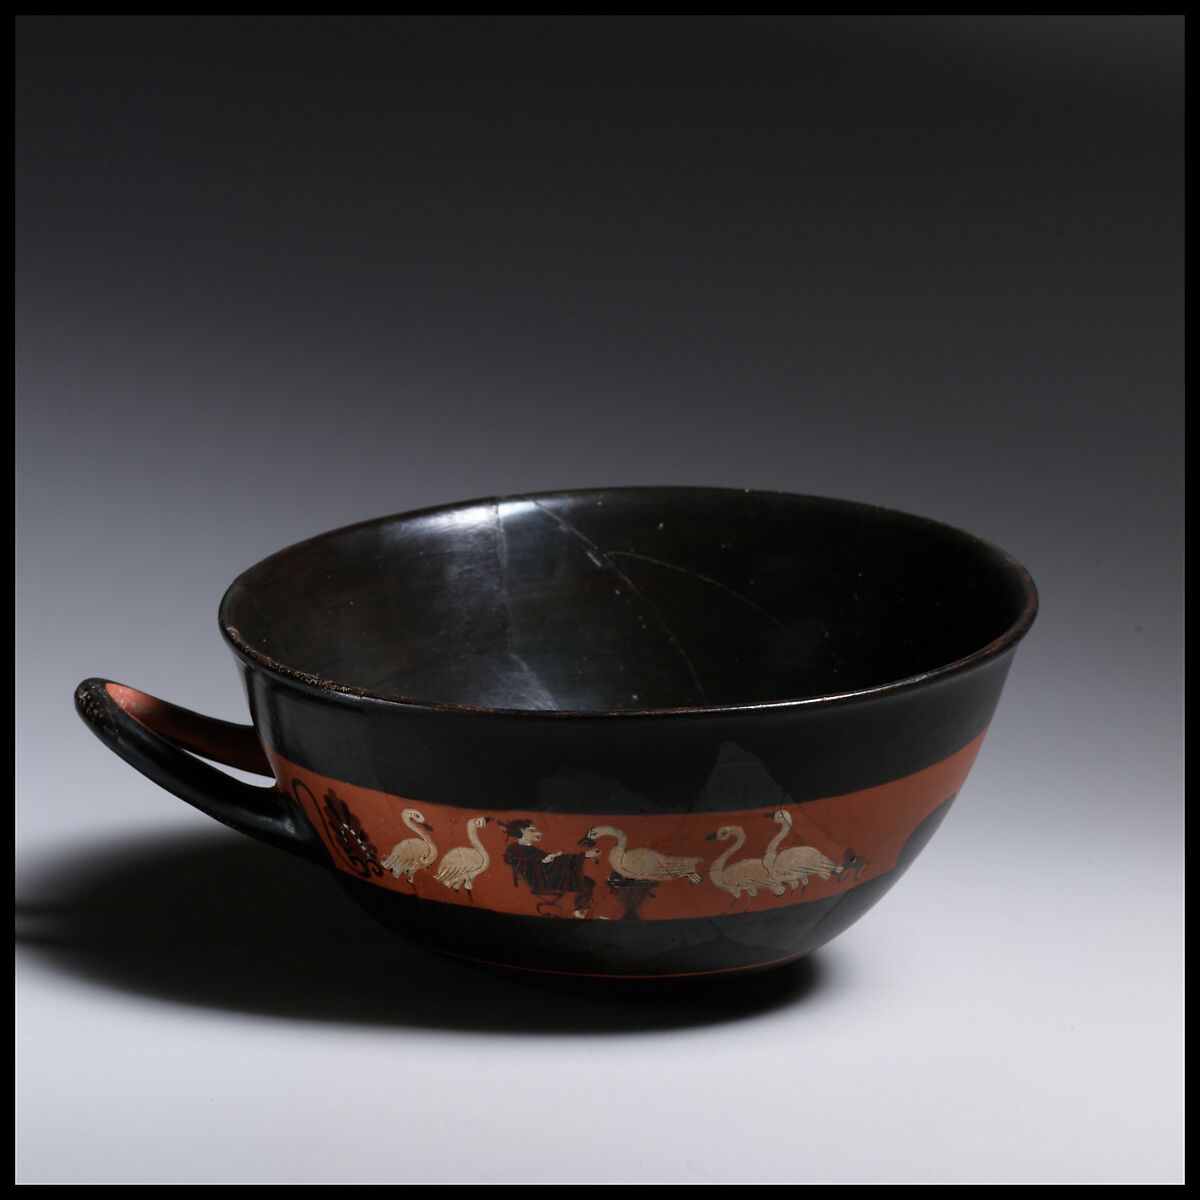 Terracotta kylix: band-cup (drinking cup), Terracotta, Greek, Attic 